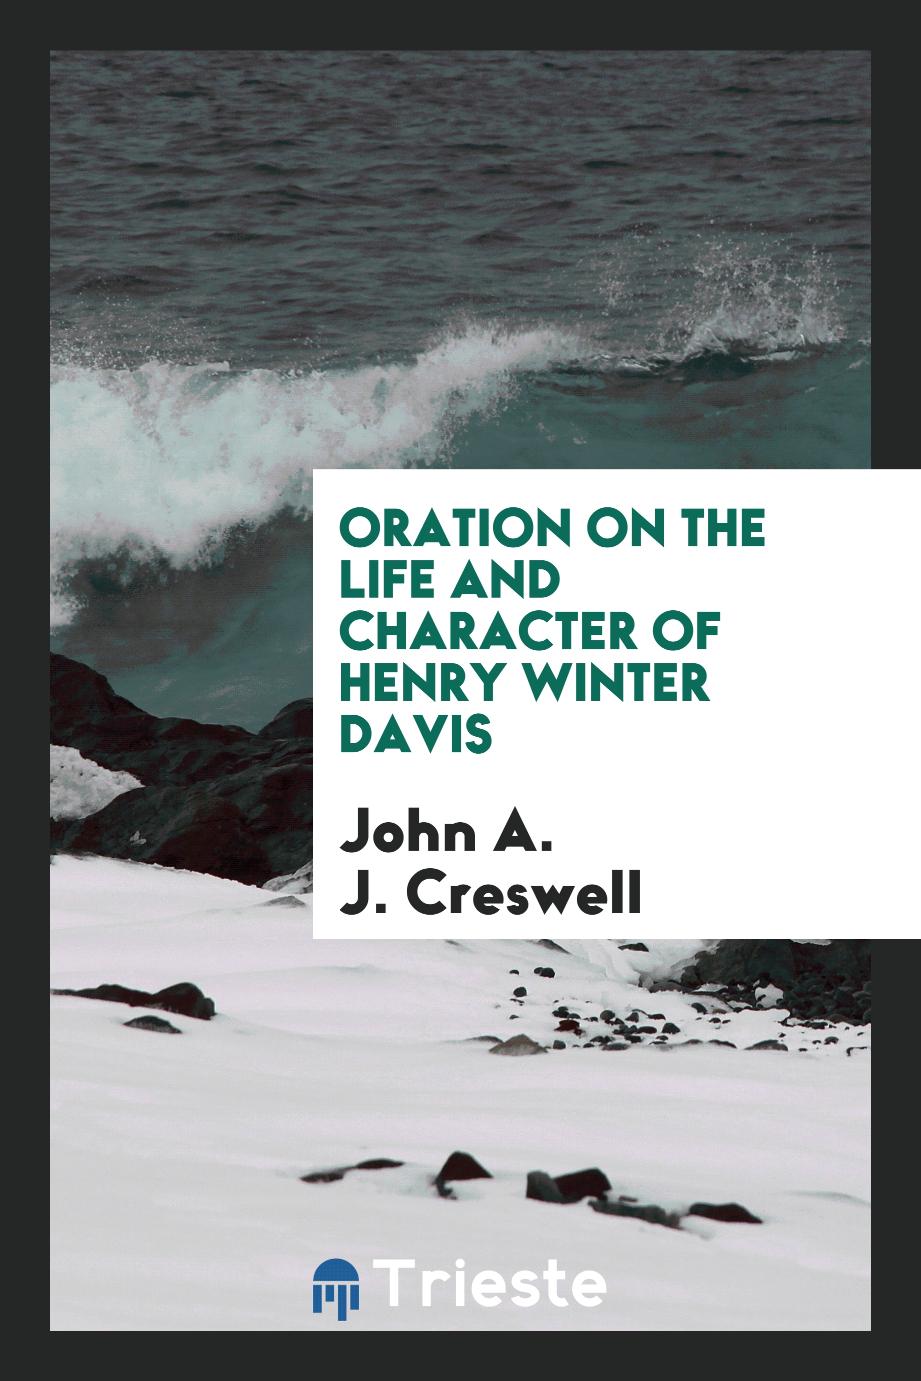 Oration on the life and character of Henry Winter Davis